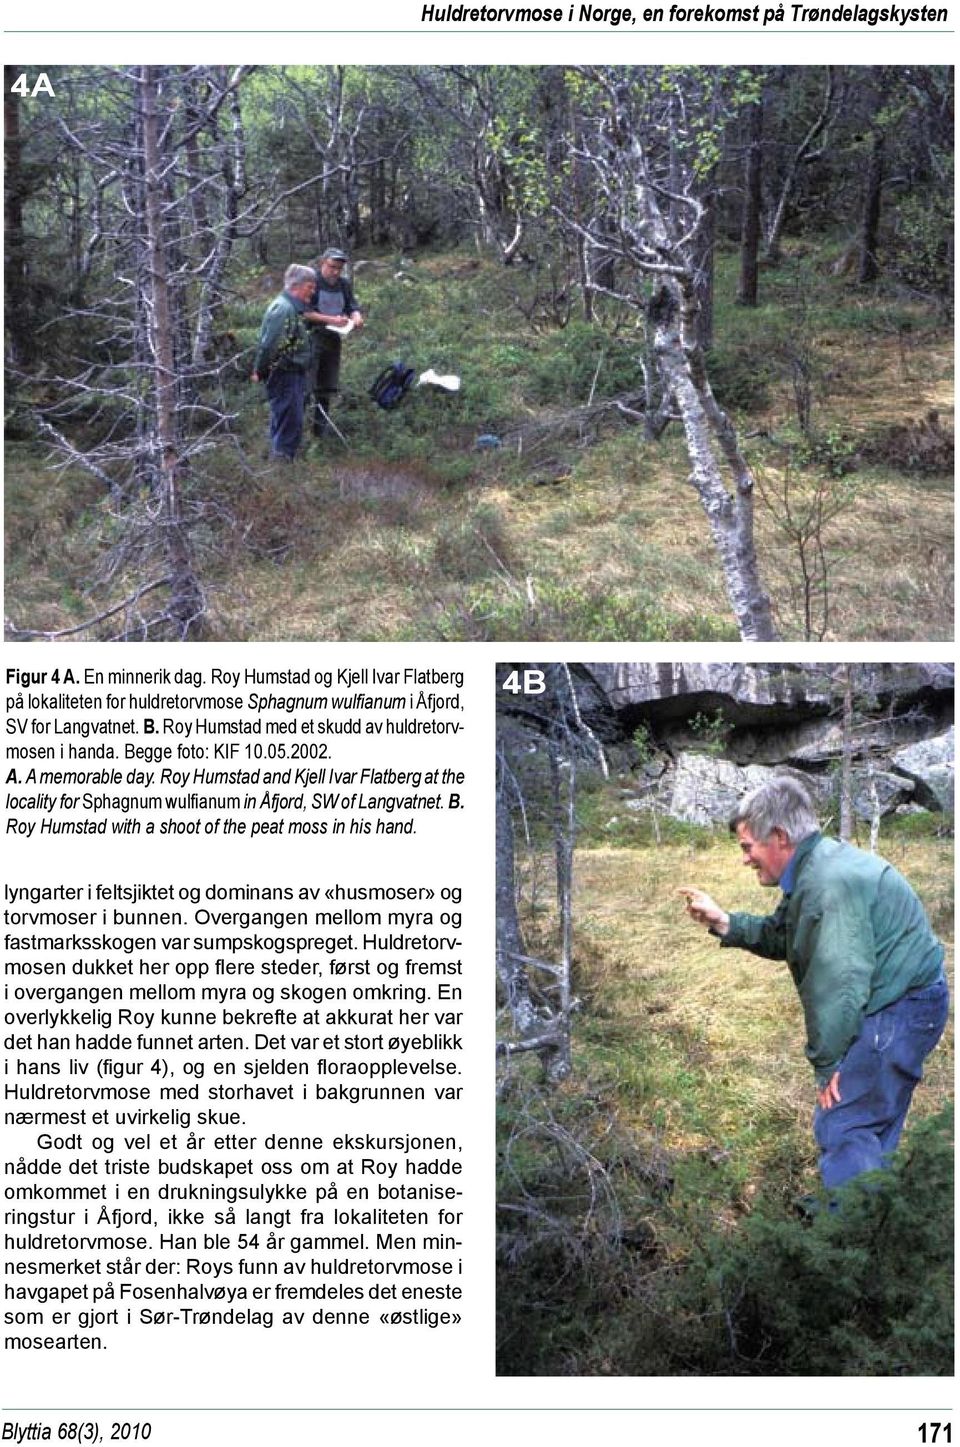 A. A memorable day. Roy Humstad and Kjell Ivar Flatberg at the locality for Sphagnum wulfianum in Åfjord, SW of Langvatnet. B. Roy Humstad with a shoot of the peat moss in his hand.